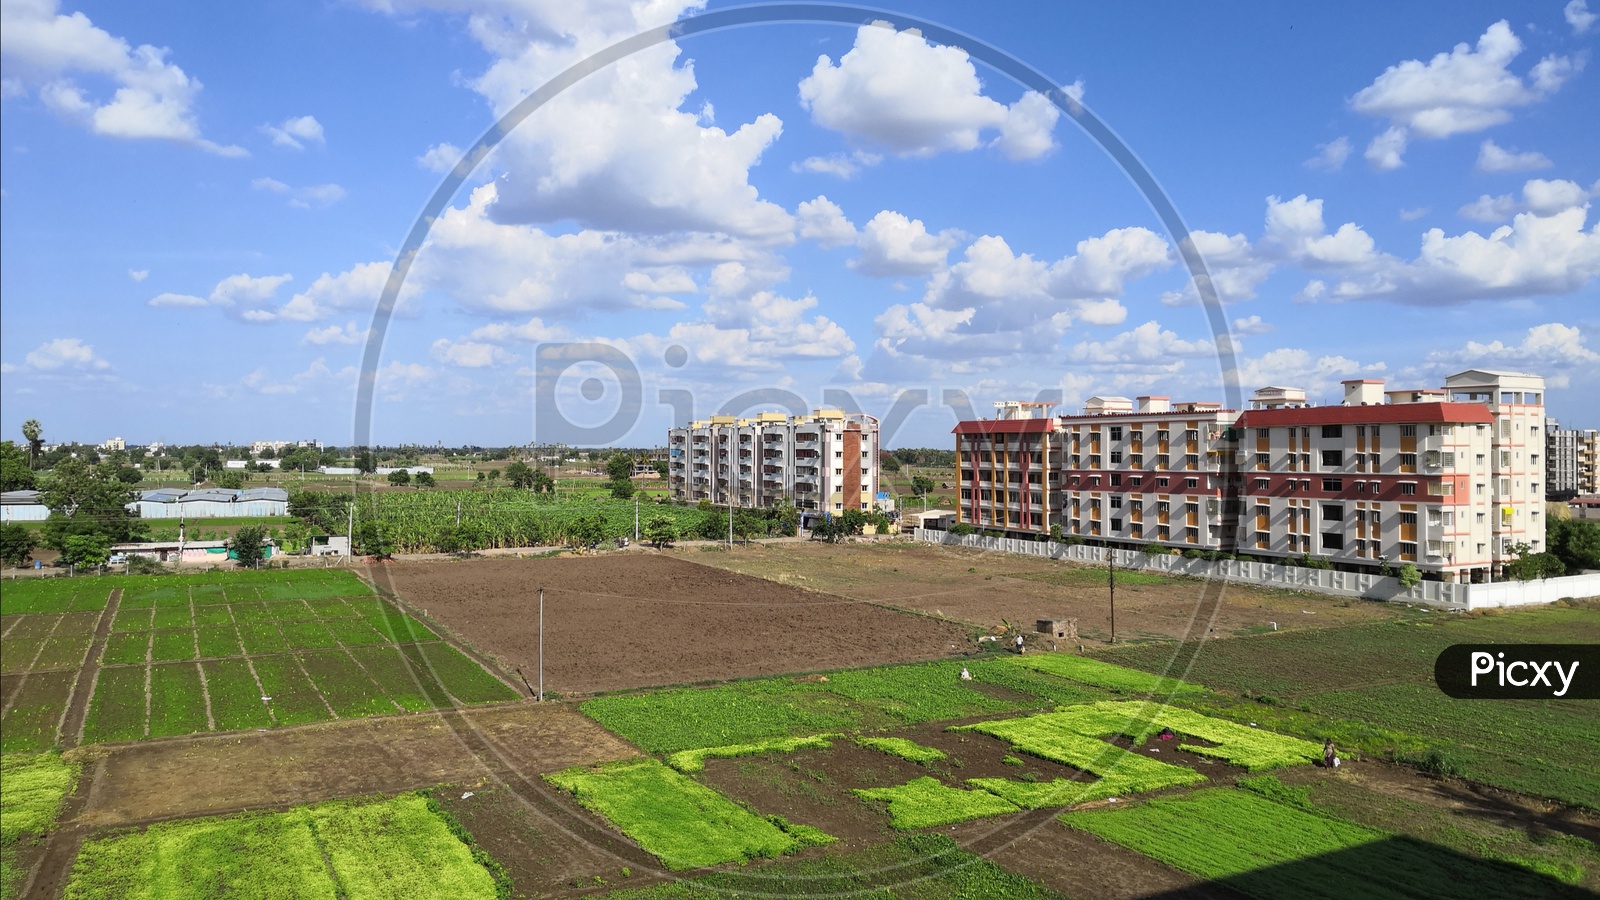 Buildings in the middle of agricultural fields